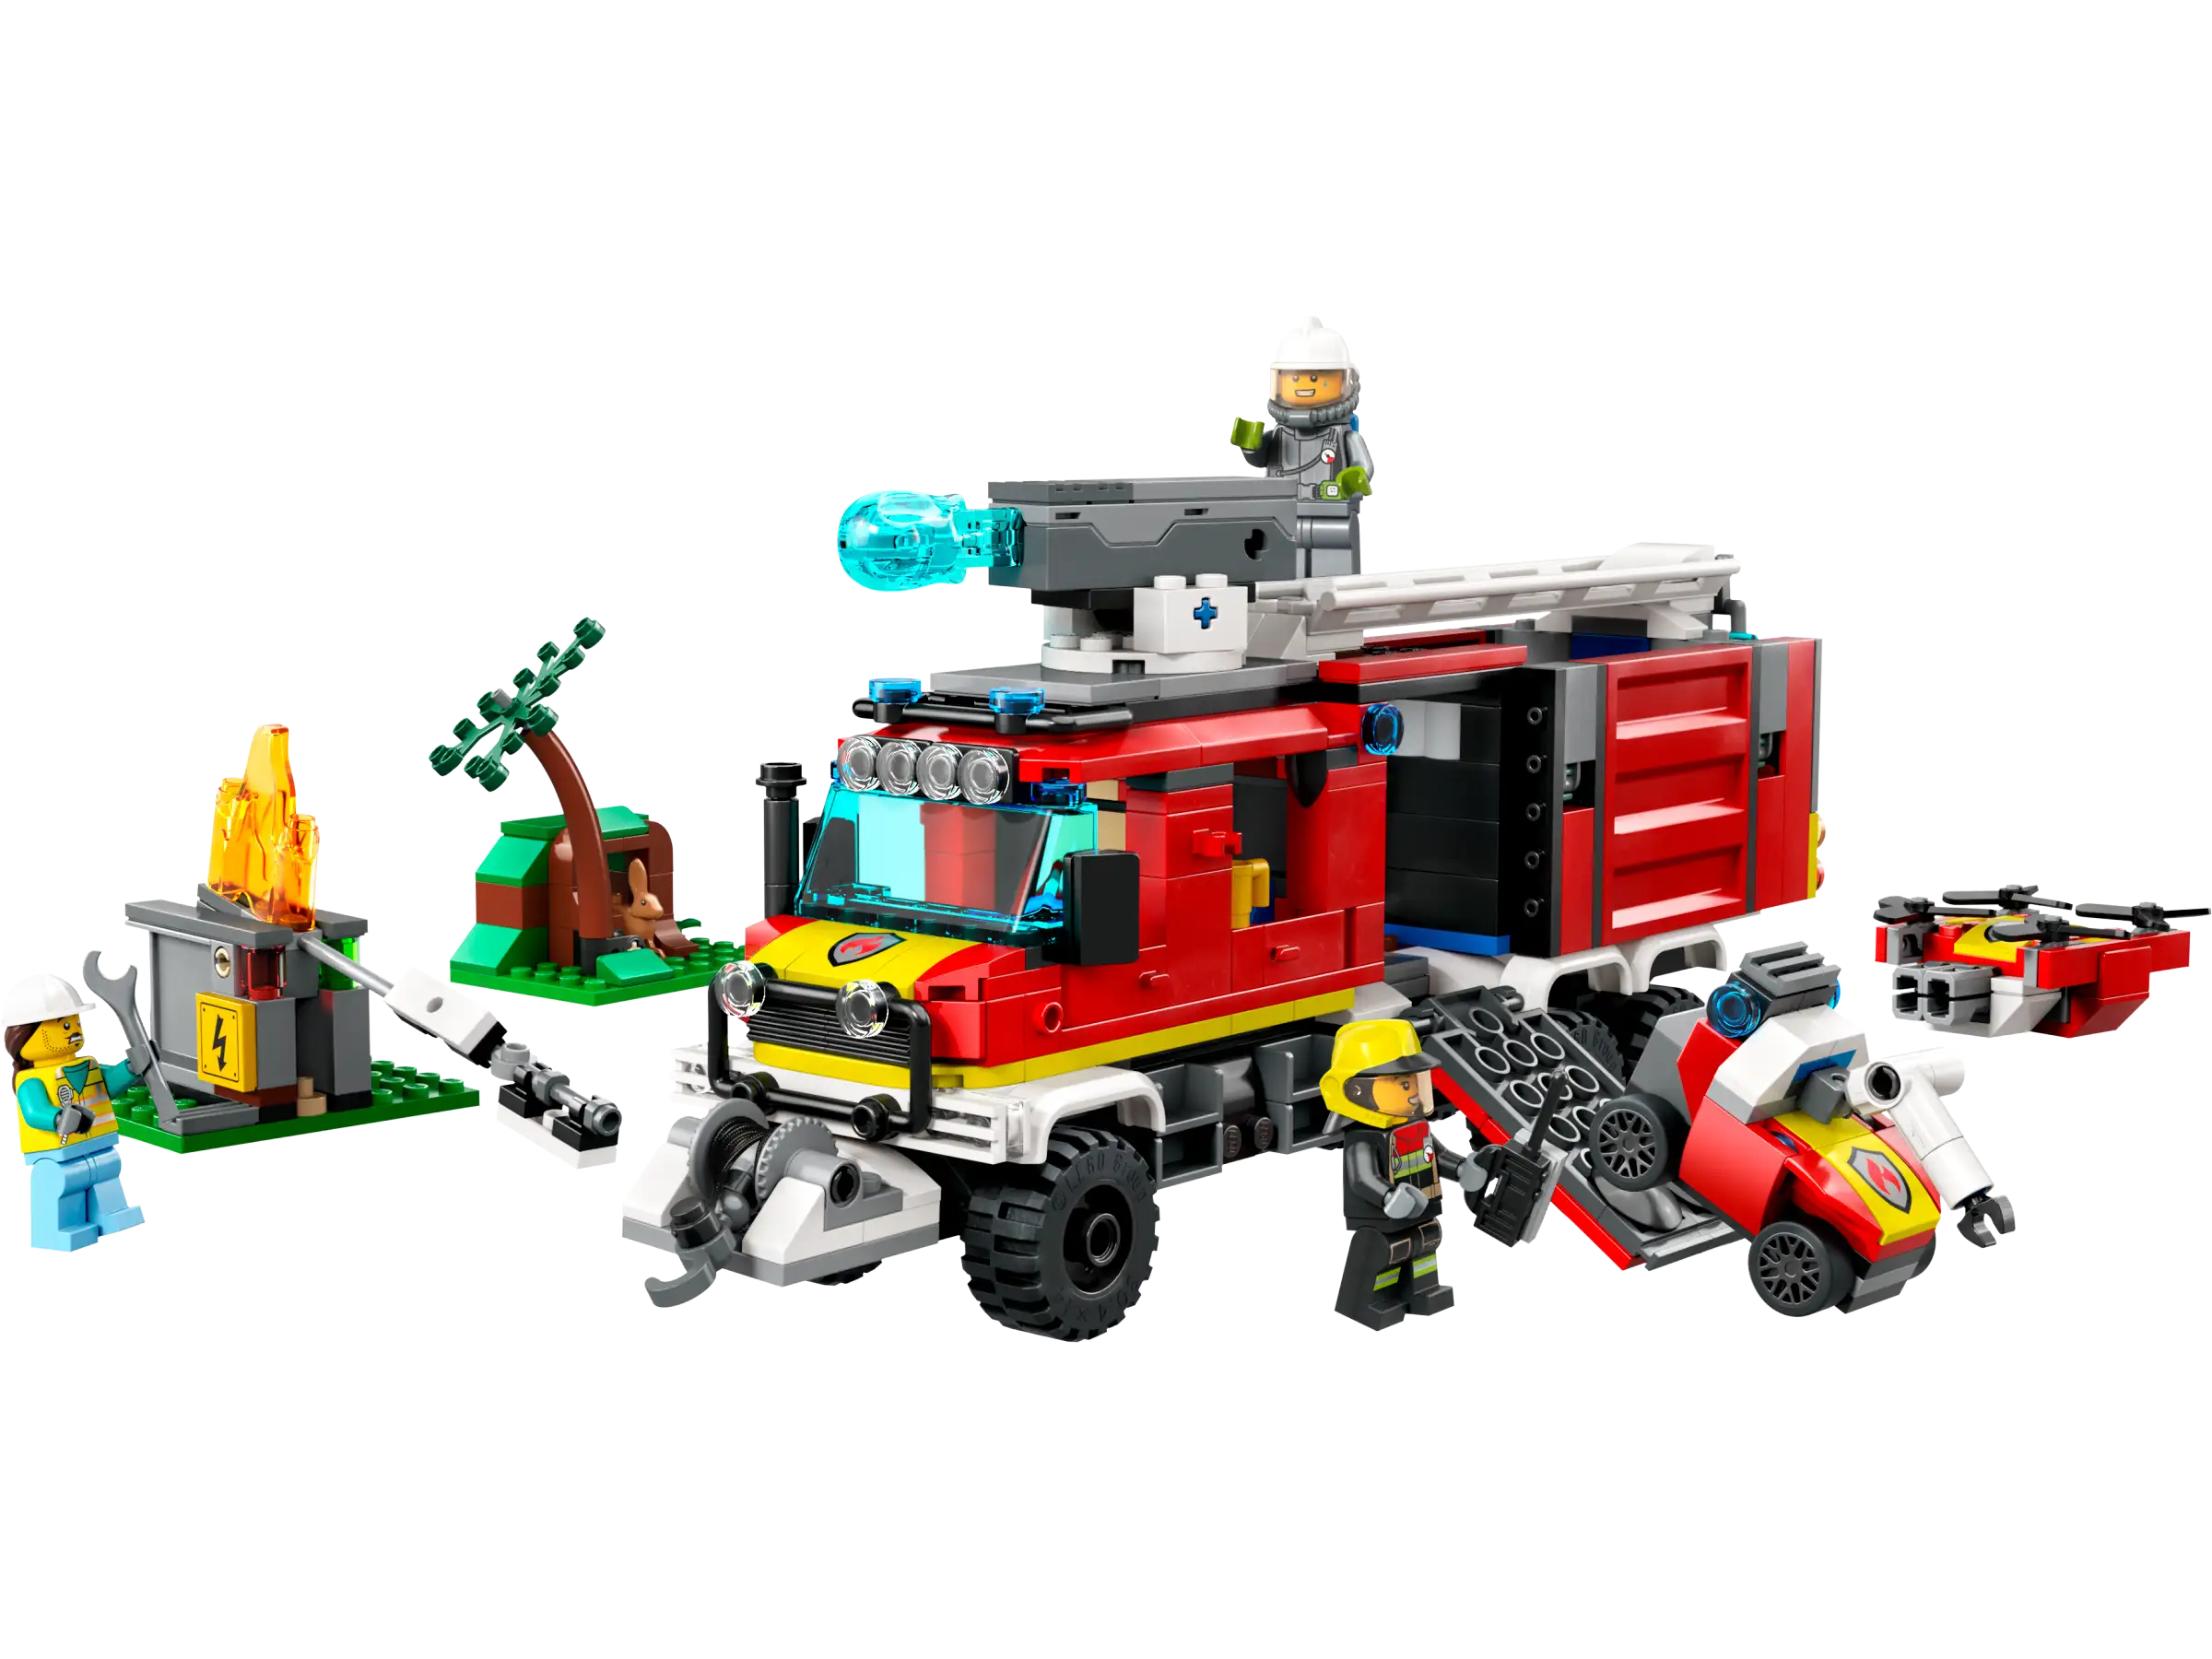 Lego - The fire command truck